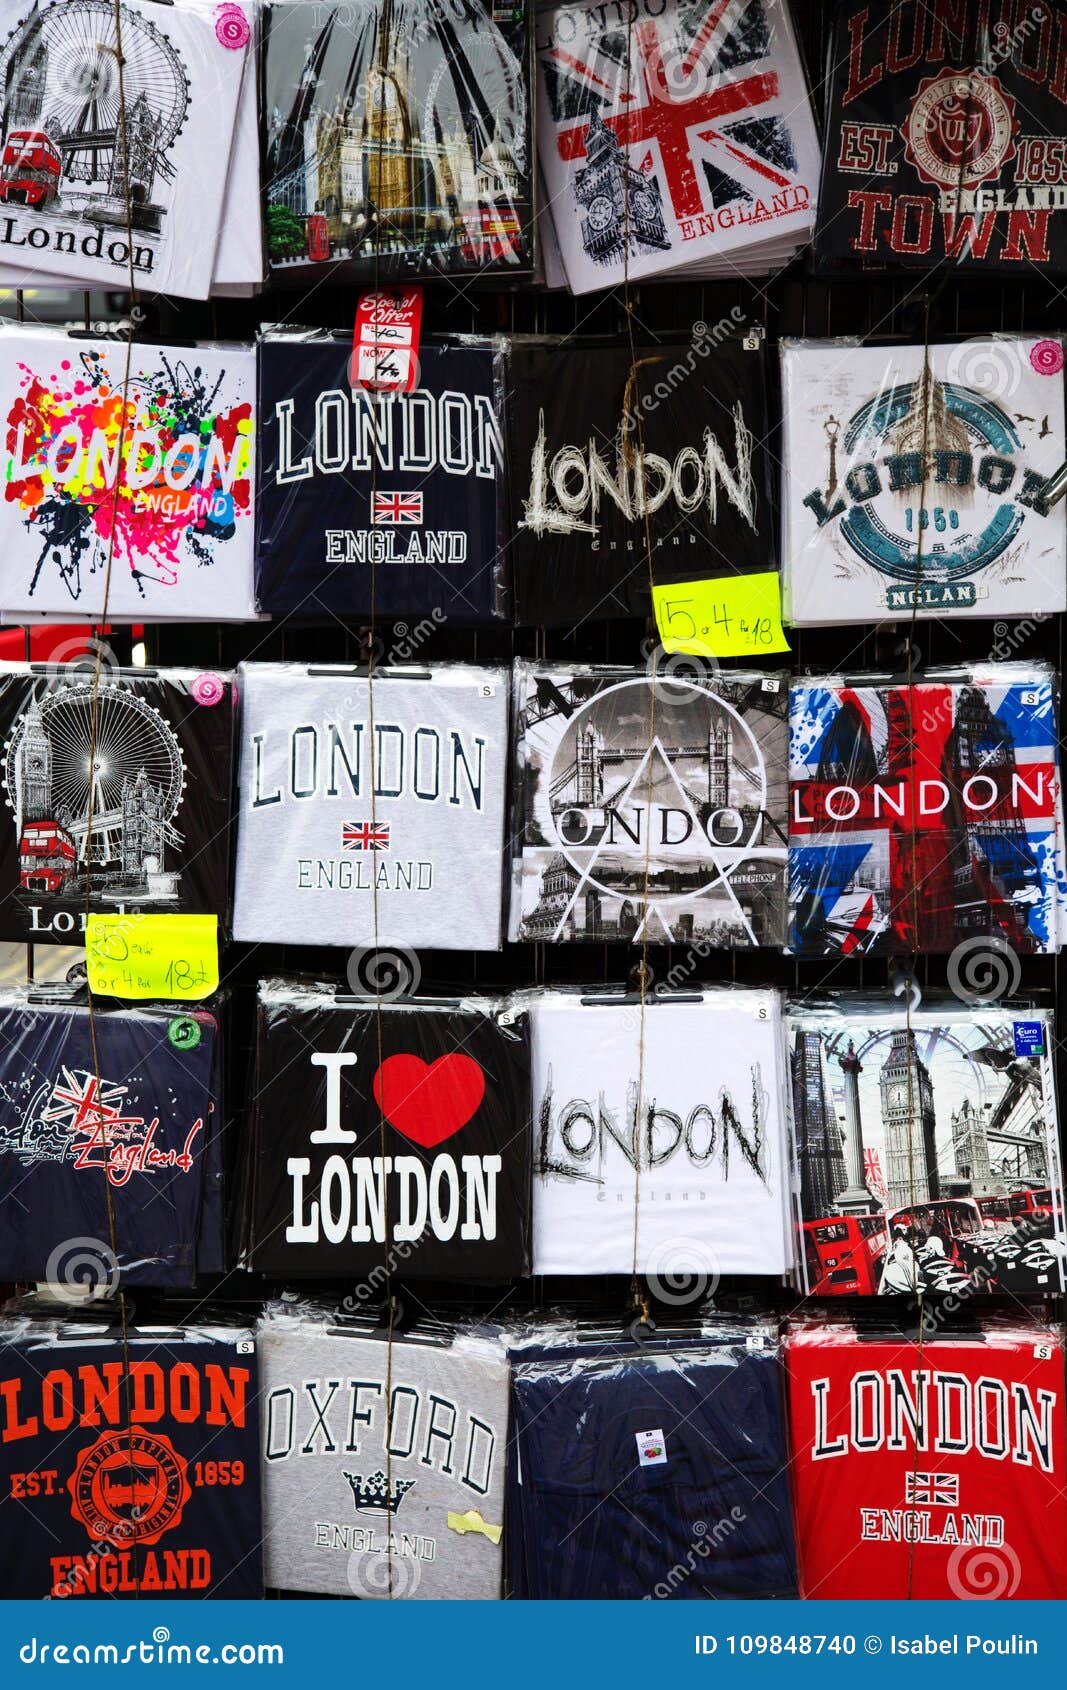 T-shirts Souvenirs Display in a Store in London Editorial Image - Image ...